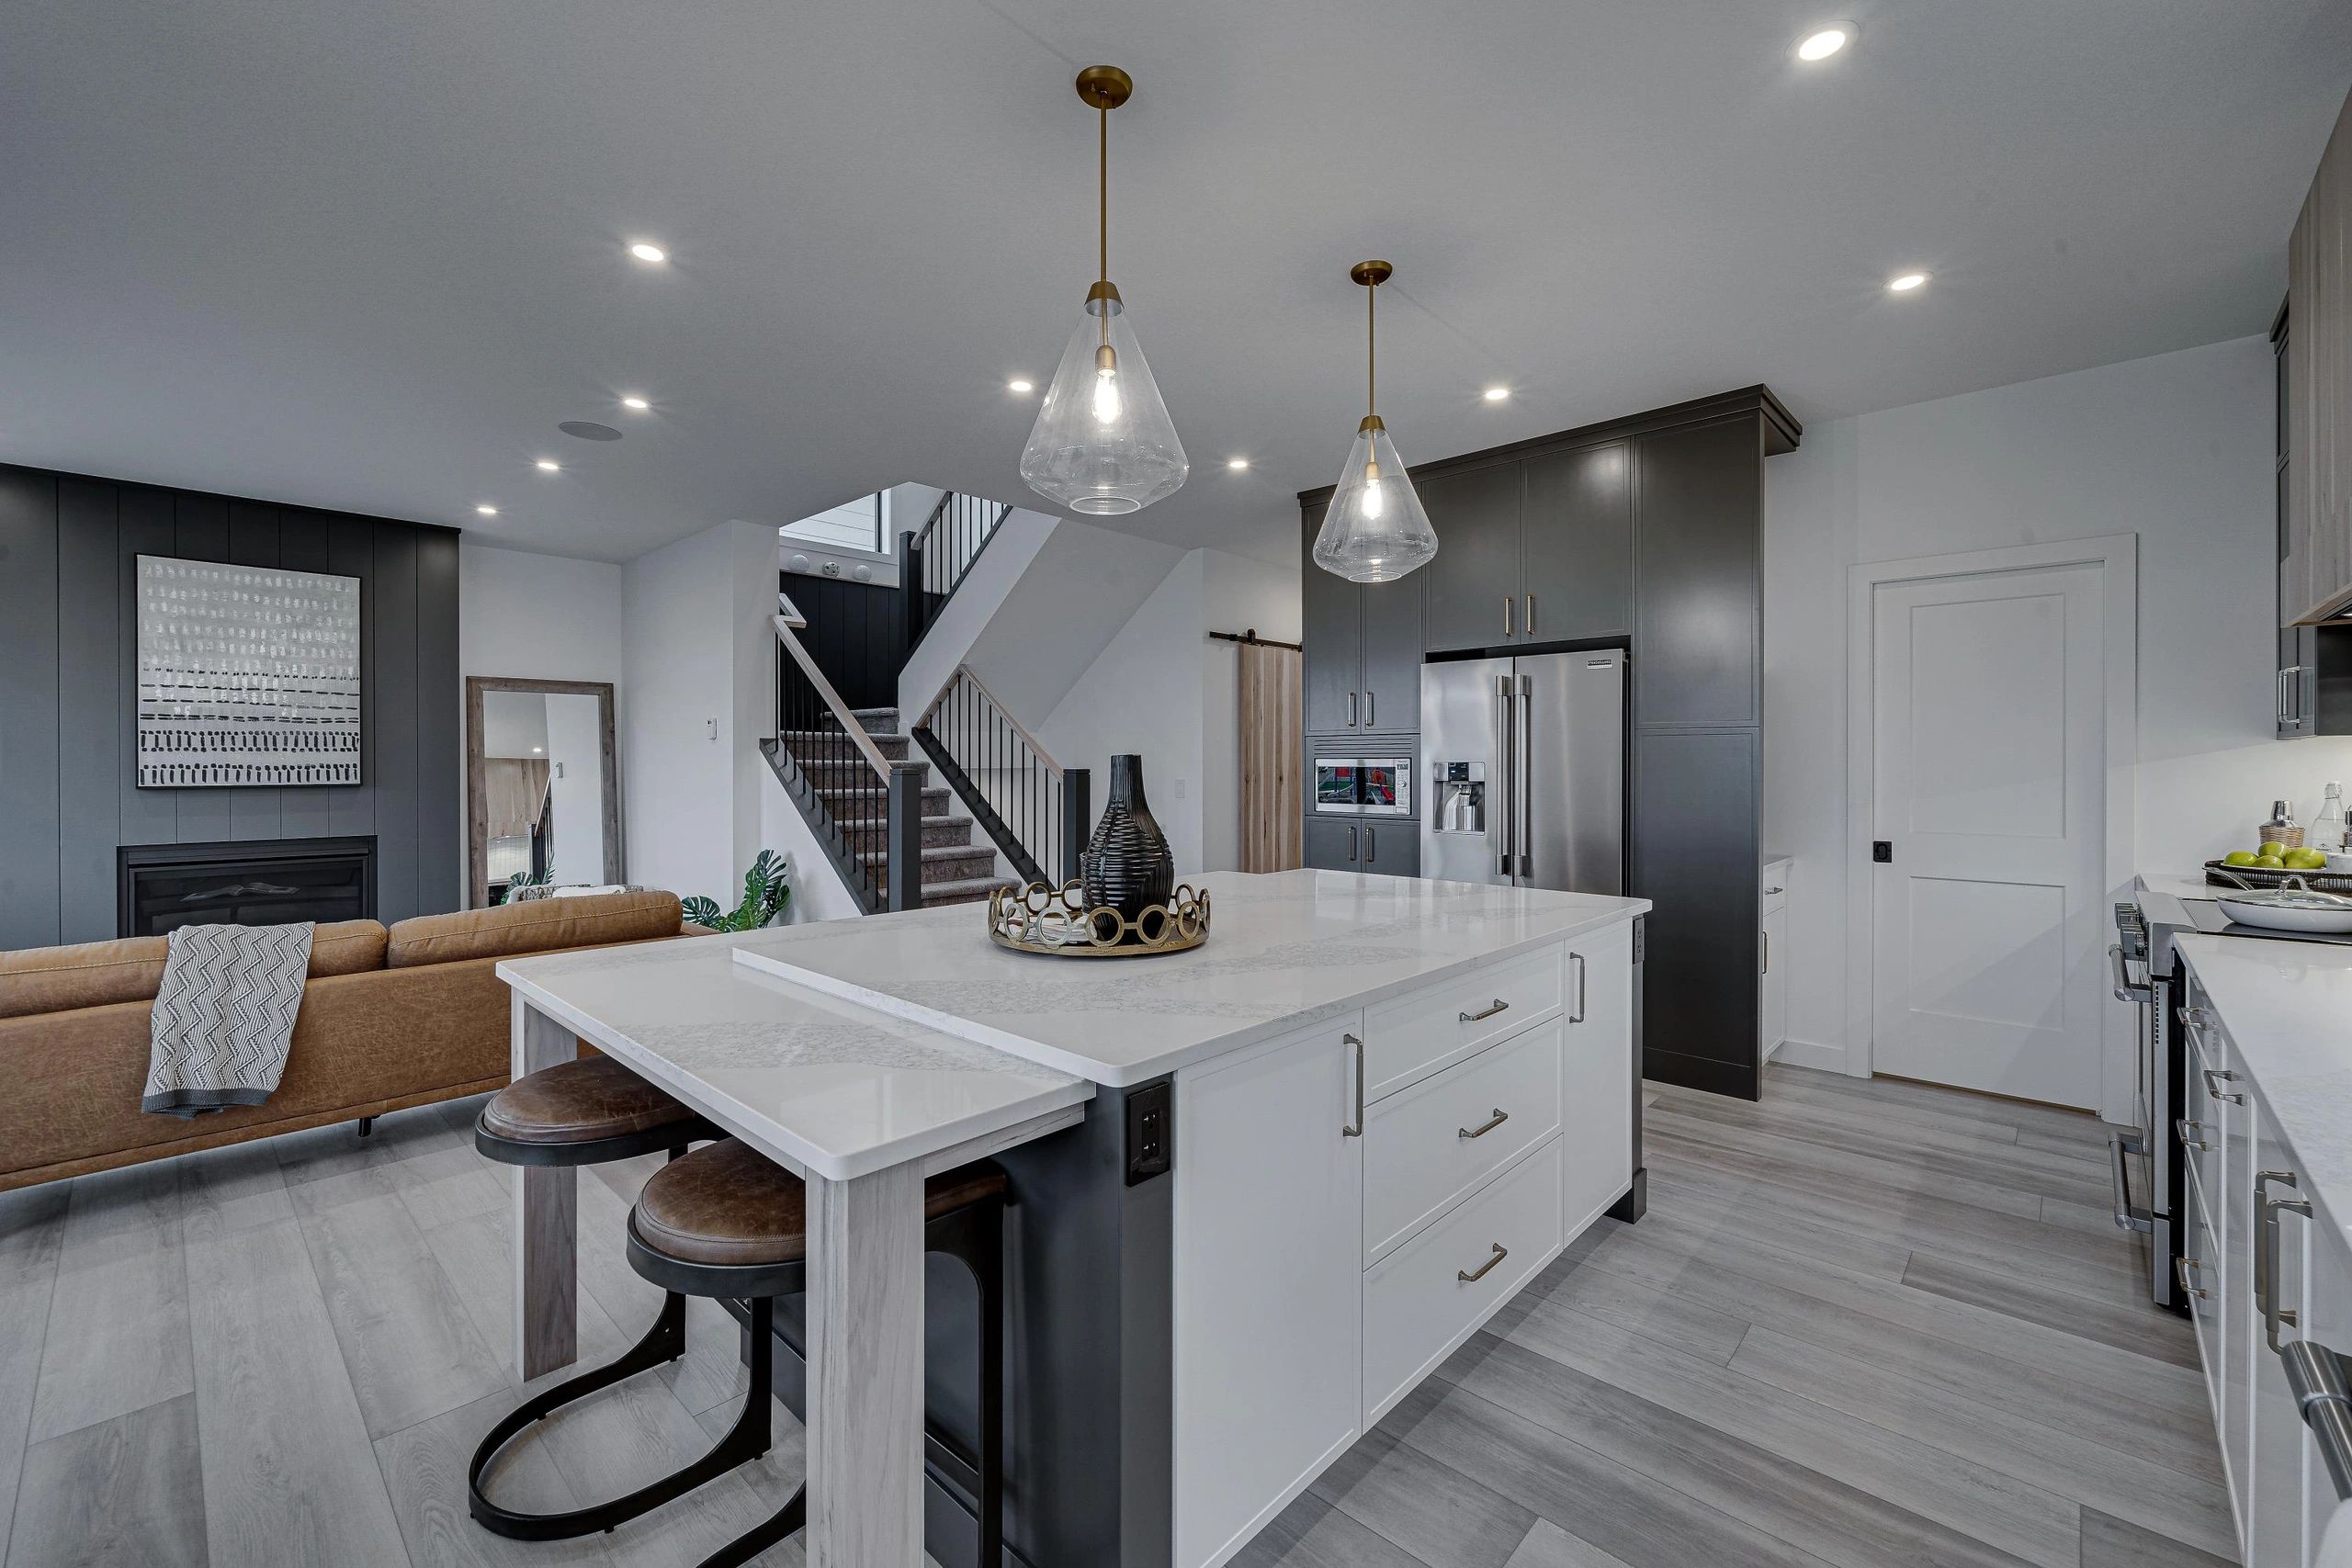 Decorations in the Lexis showhome kitchen by Funktional Space interior decorating, Saskatoon
